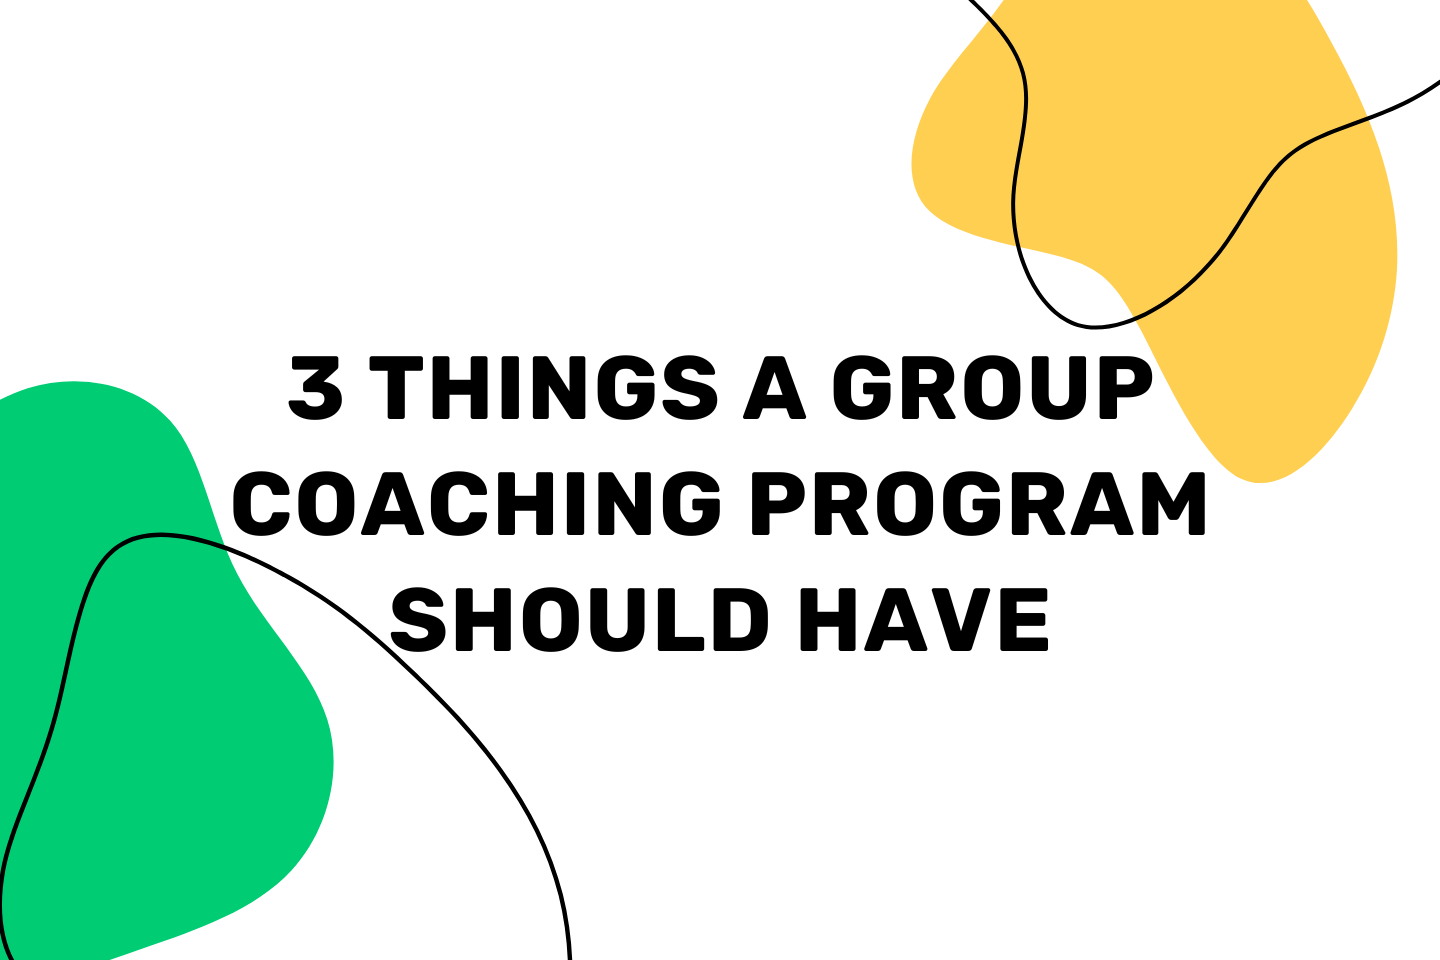 3 Things a Group Coaching Program Should Have